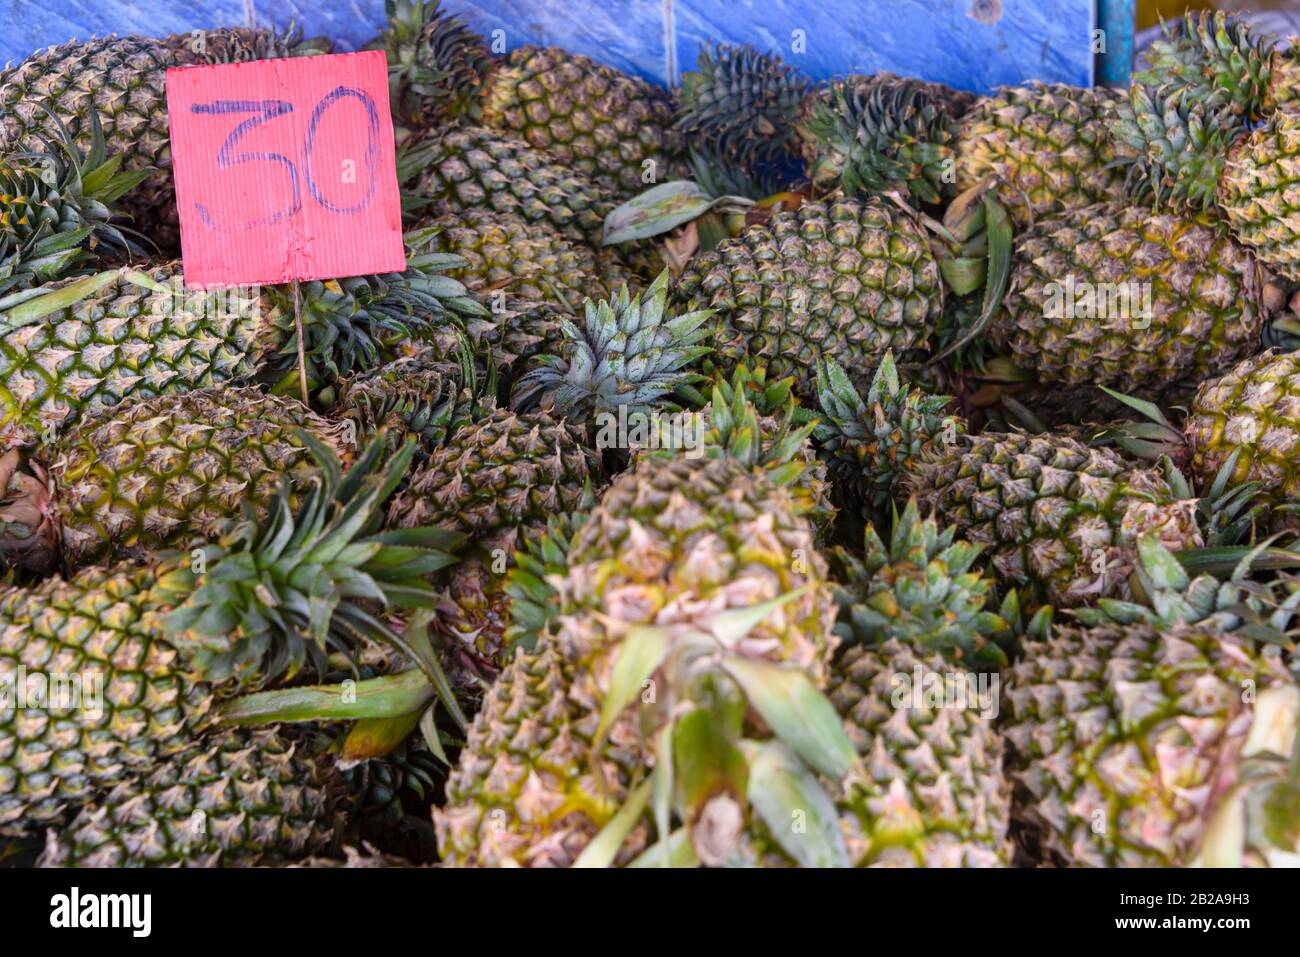 Pineapples for sale with a price sign at a Thai fruit stall at a food market, Thailand Stock Photo